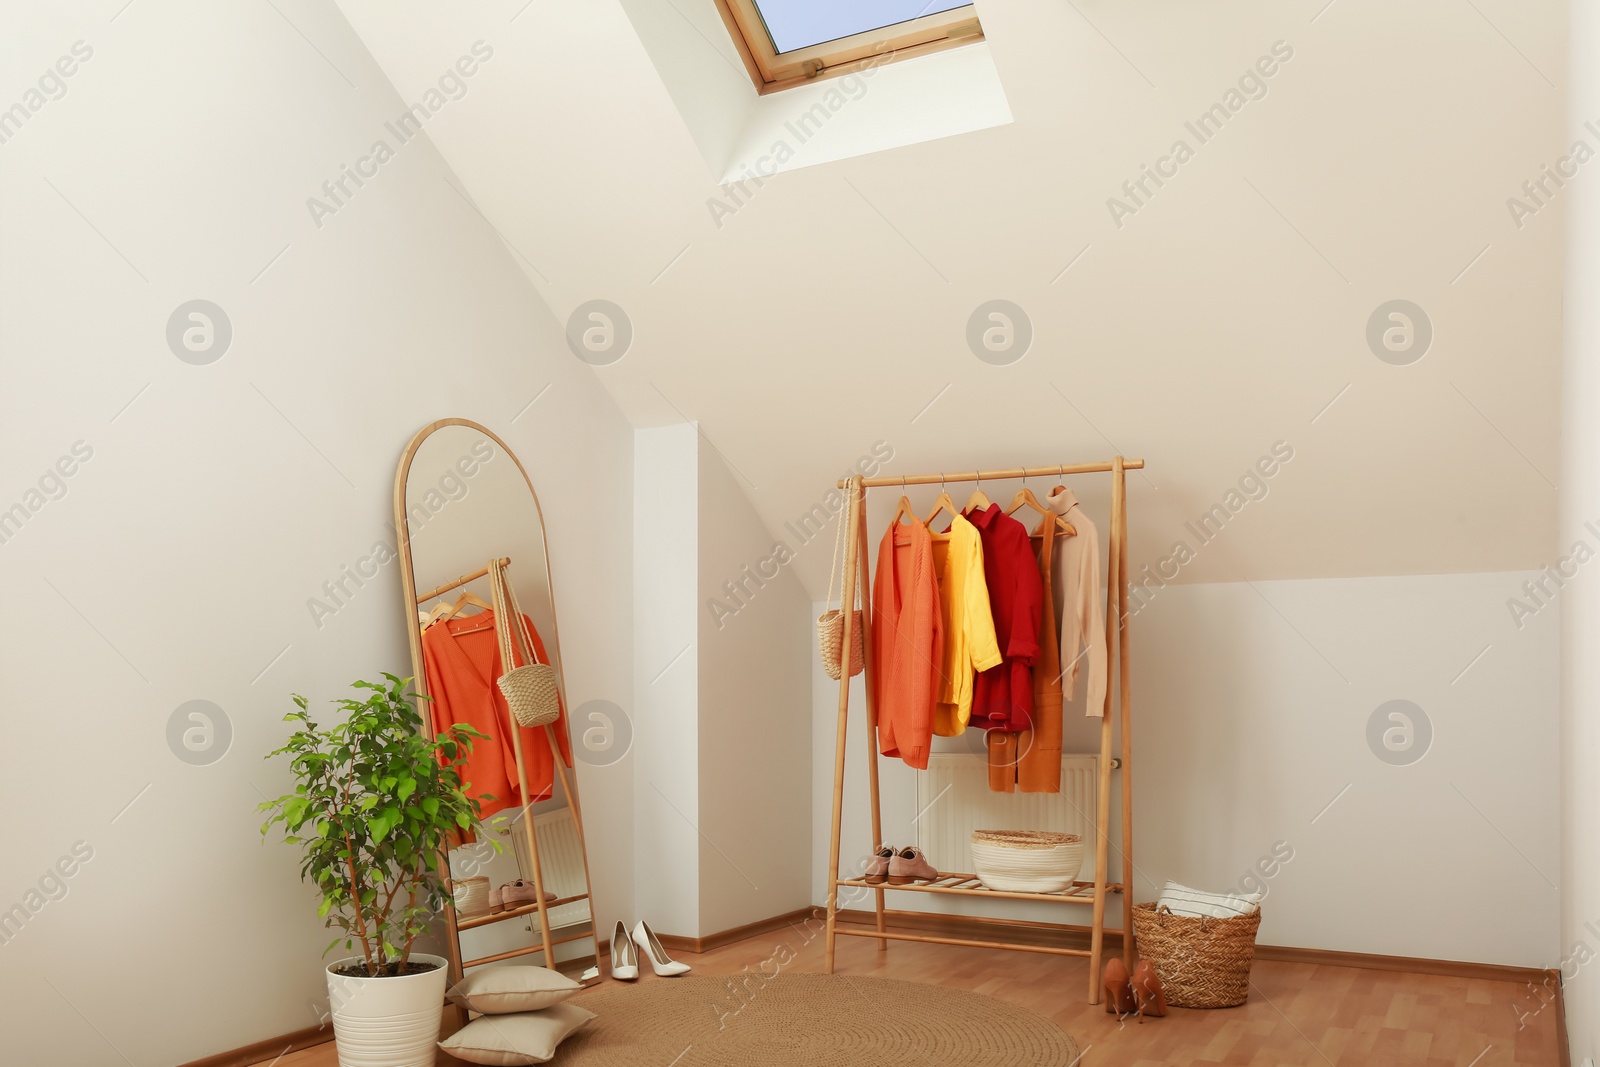 Photo of Stylish clothes rack, mirror and houseplant in room. Interior design